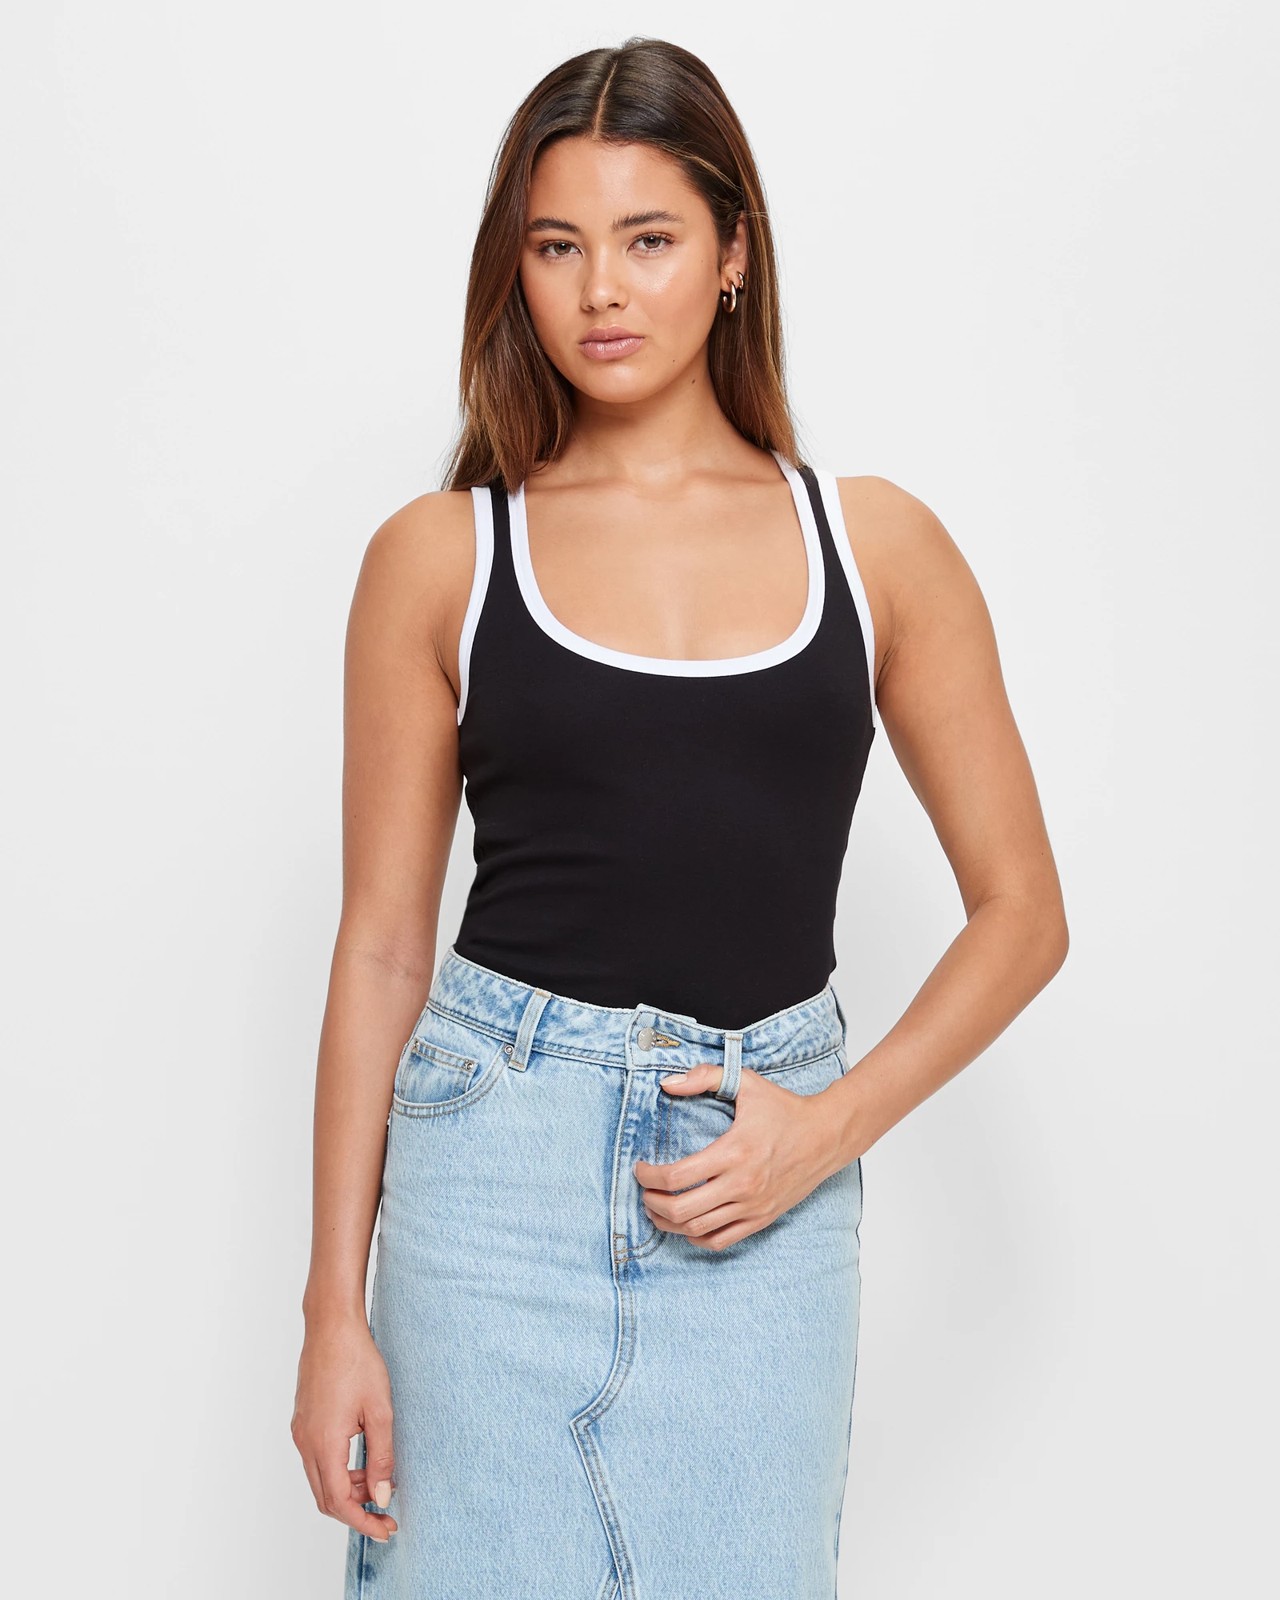 Scoop Neck Tank Top - Lily Loves - Black/White Contrast Bind